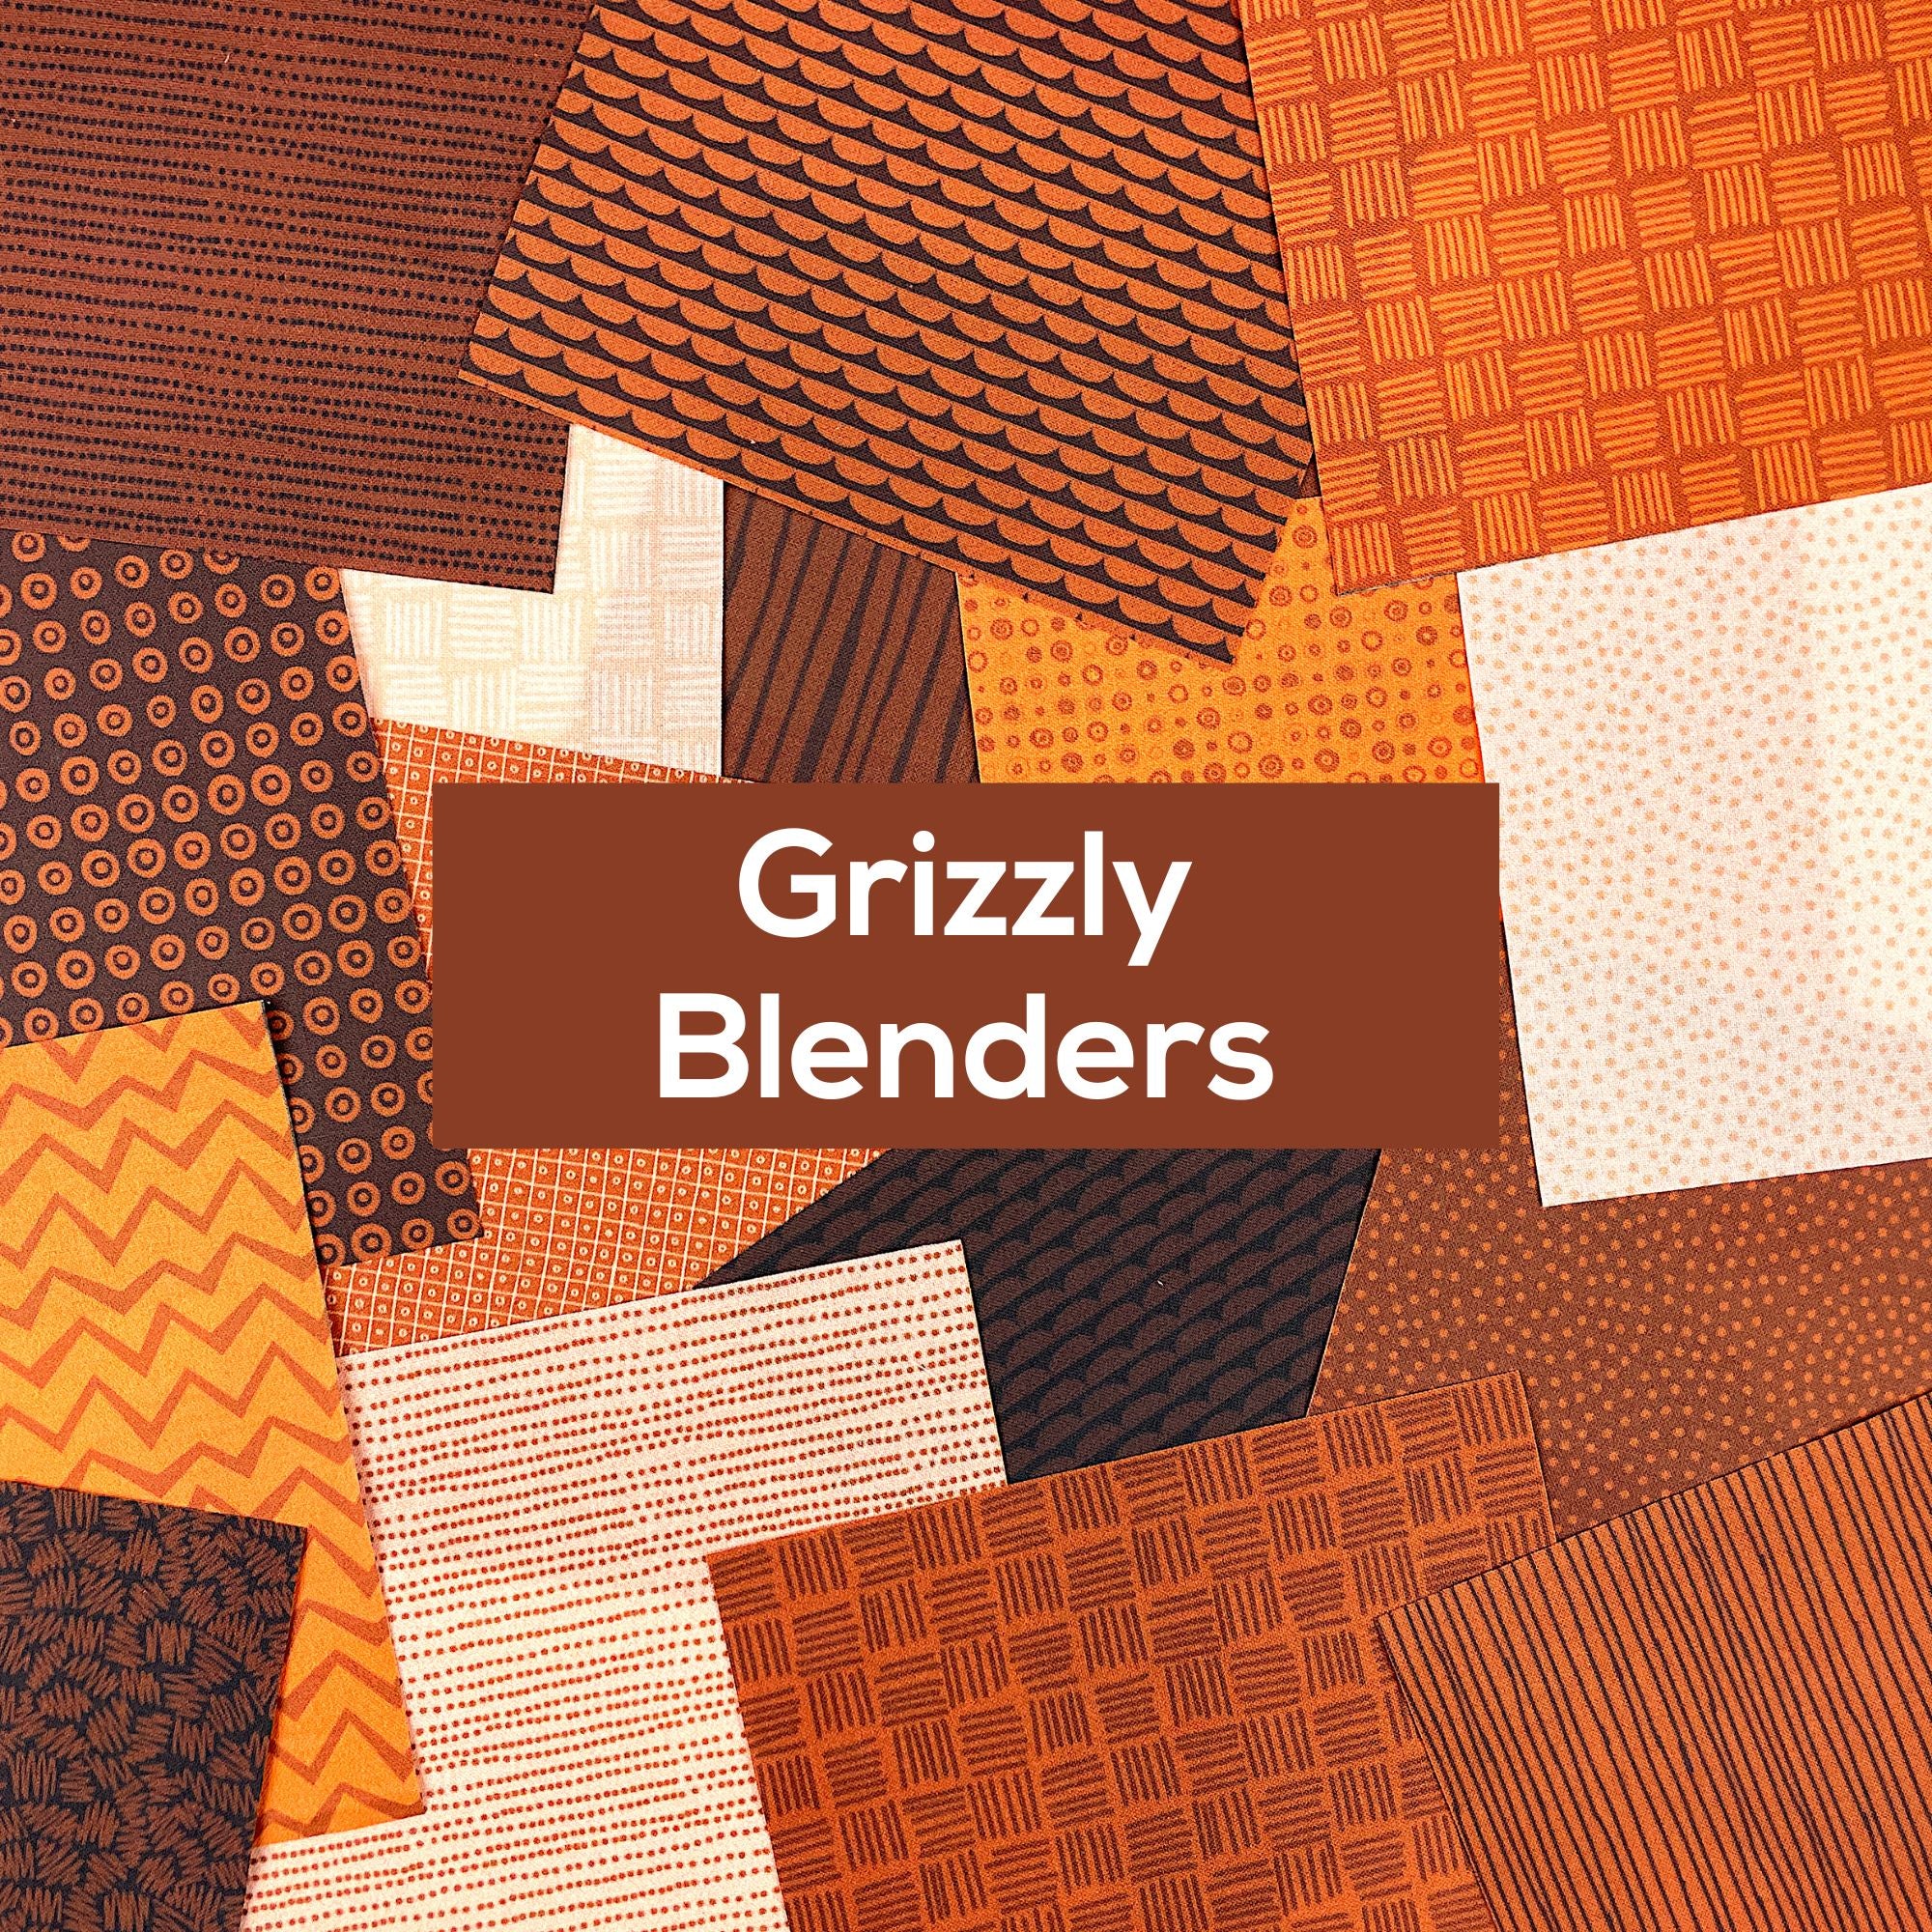 Grizzly Blenders